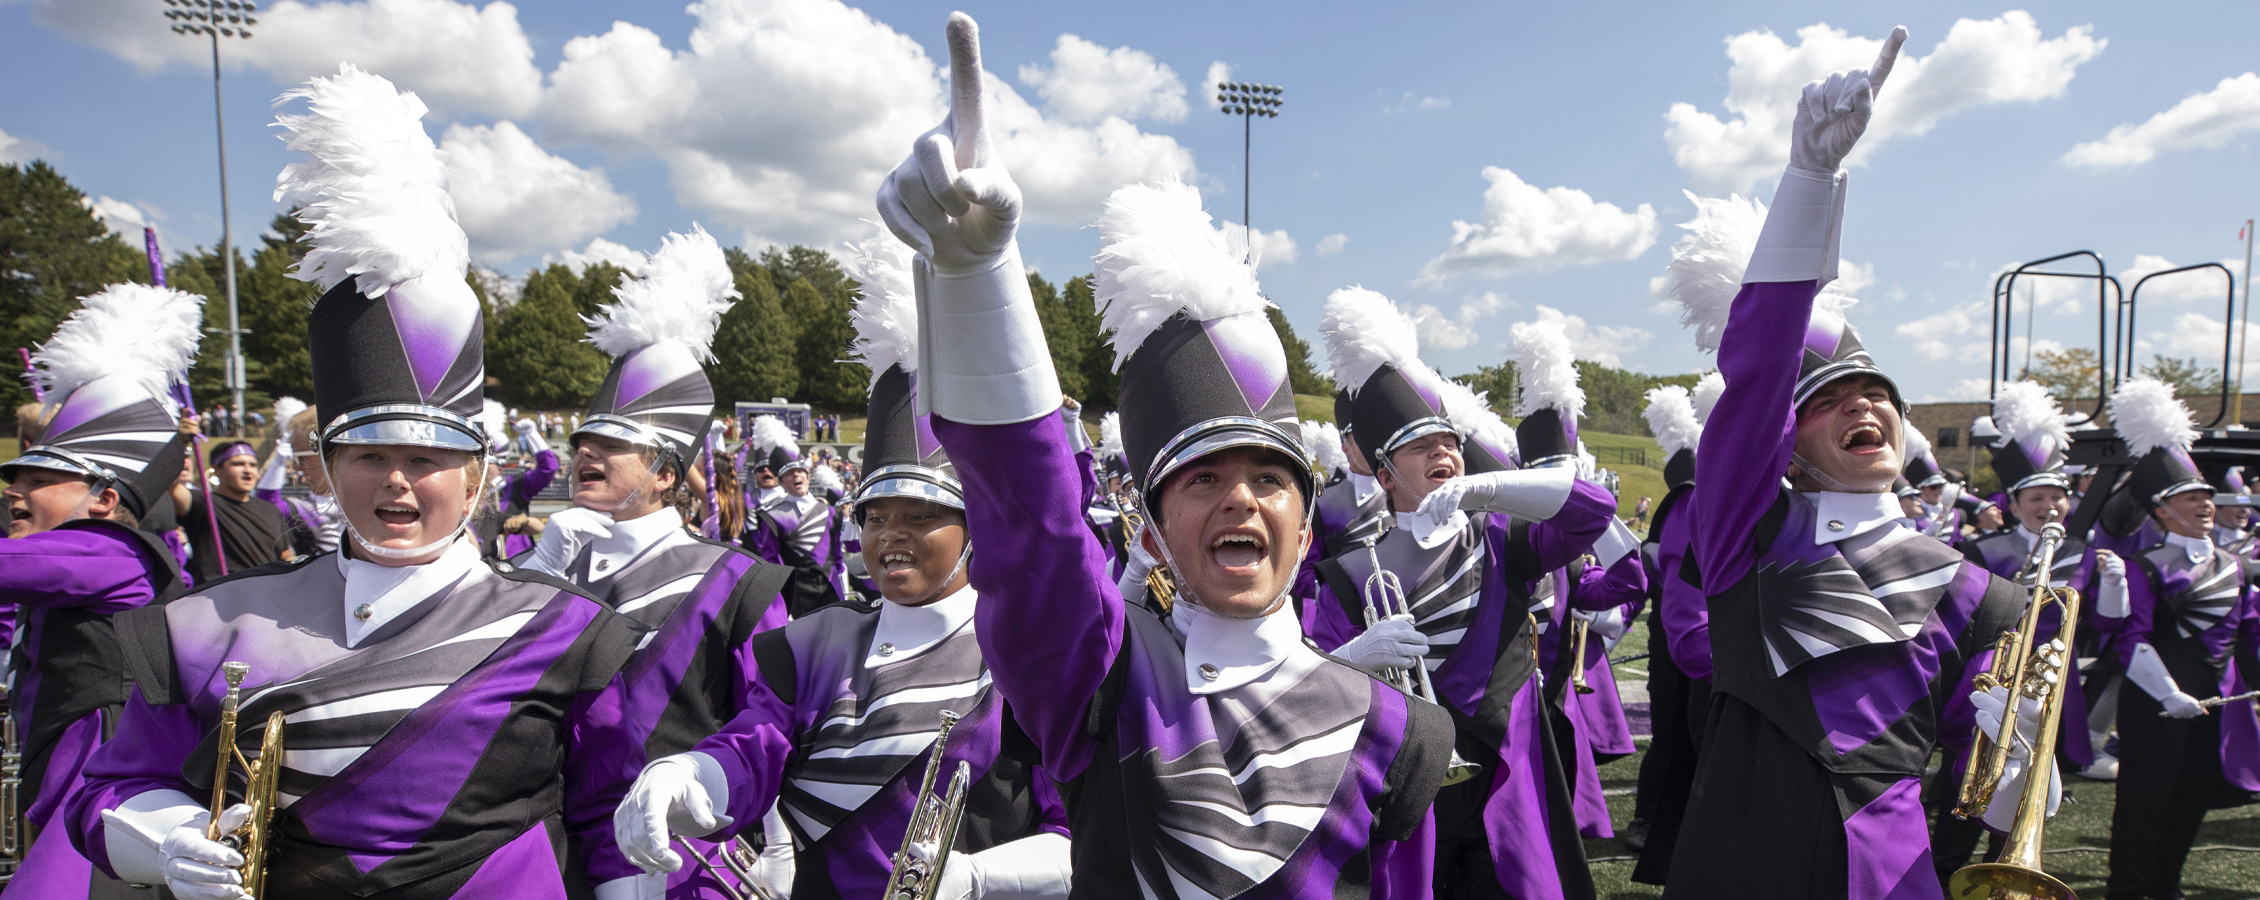 The Marching Band cheers while wearing their new uniforms.